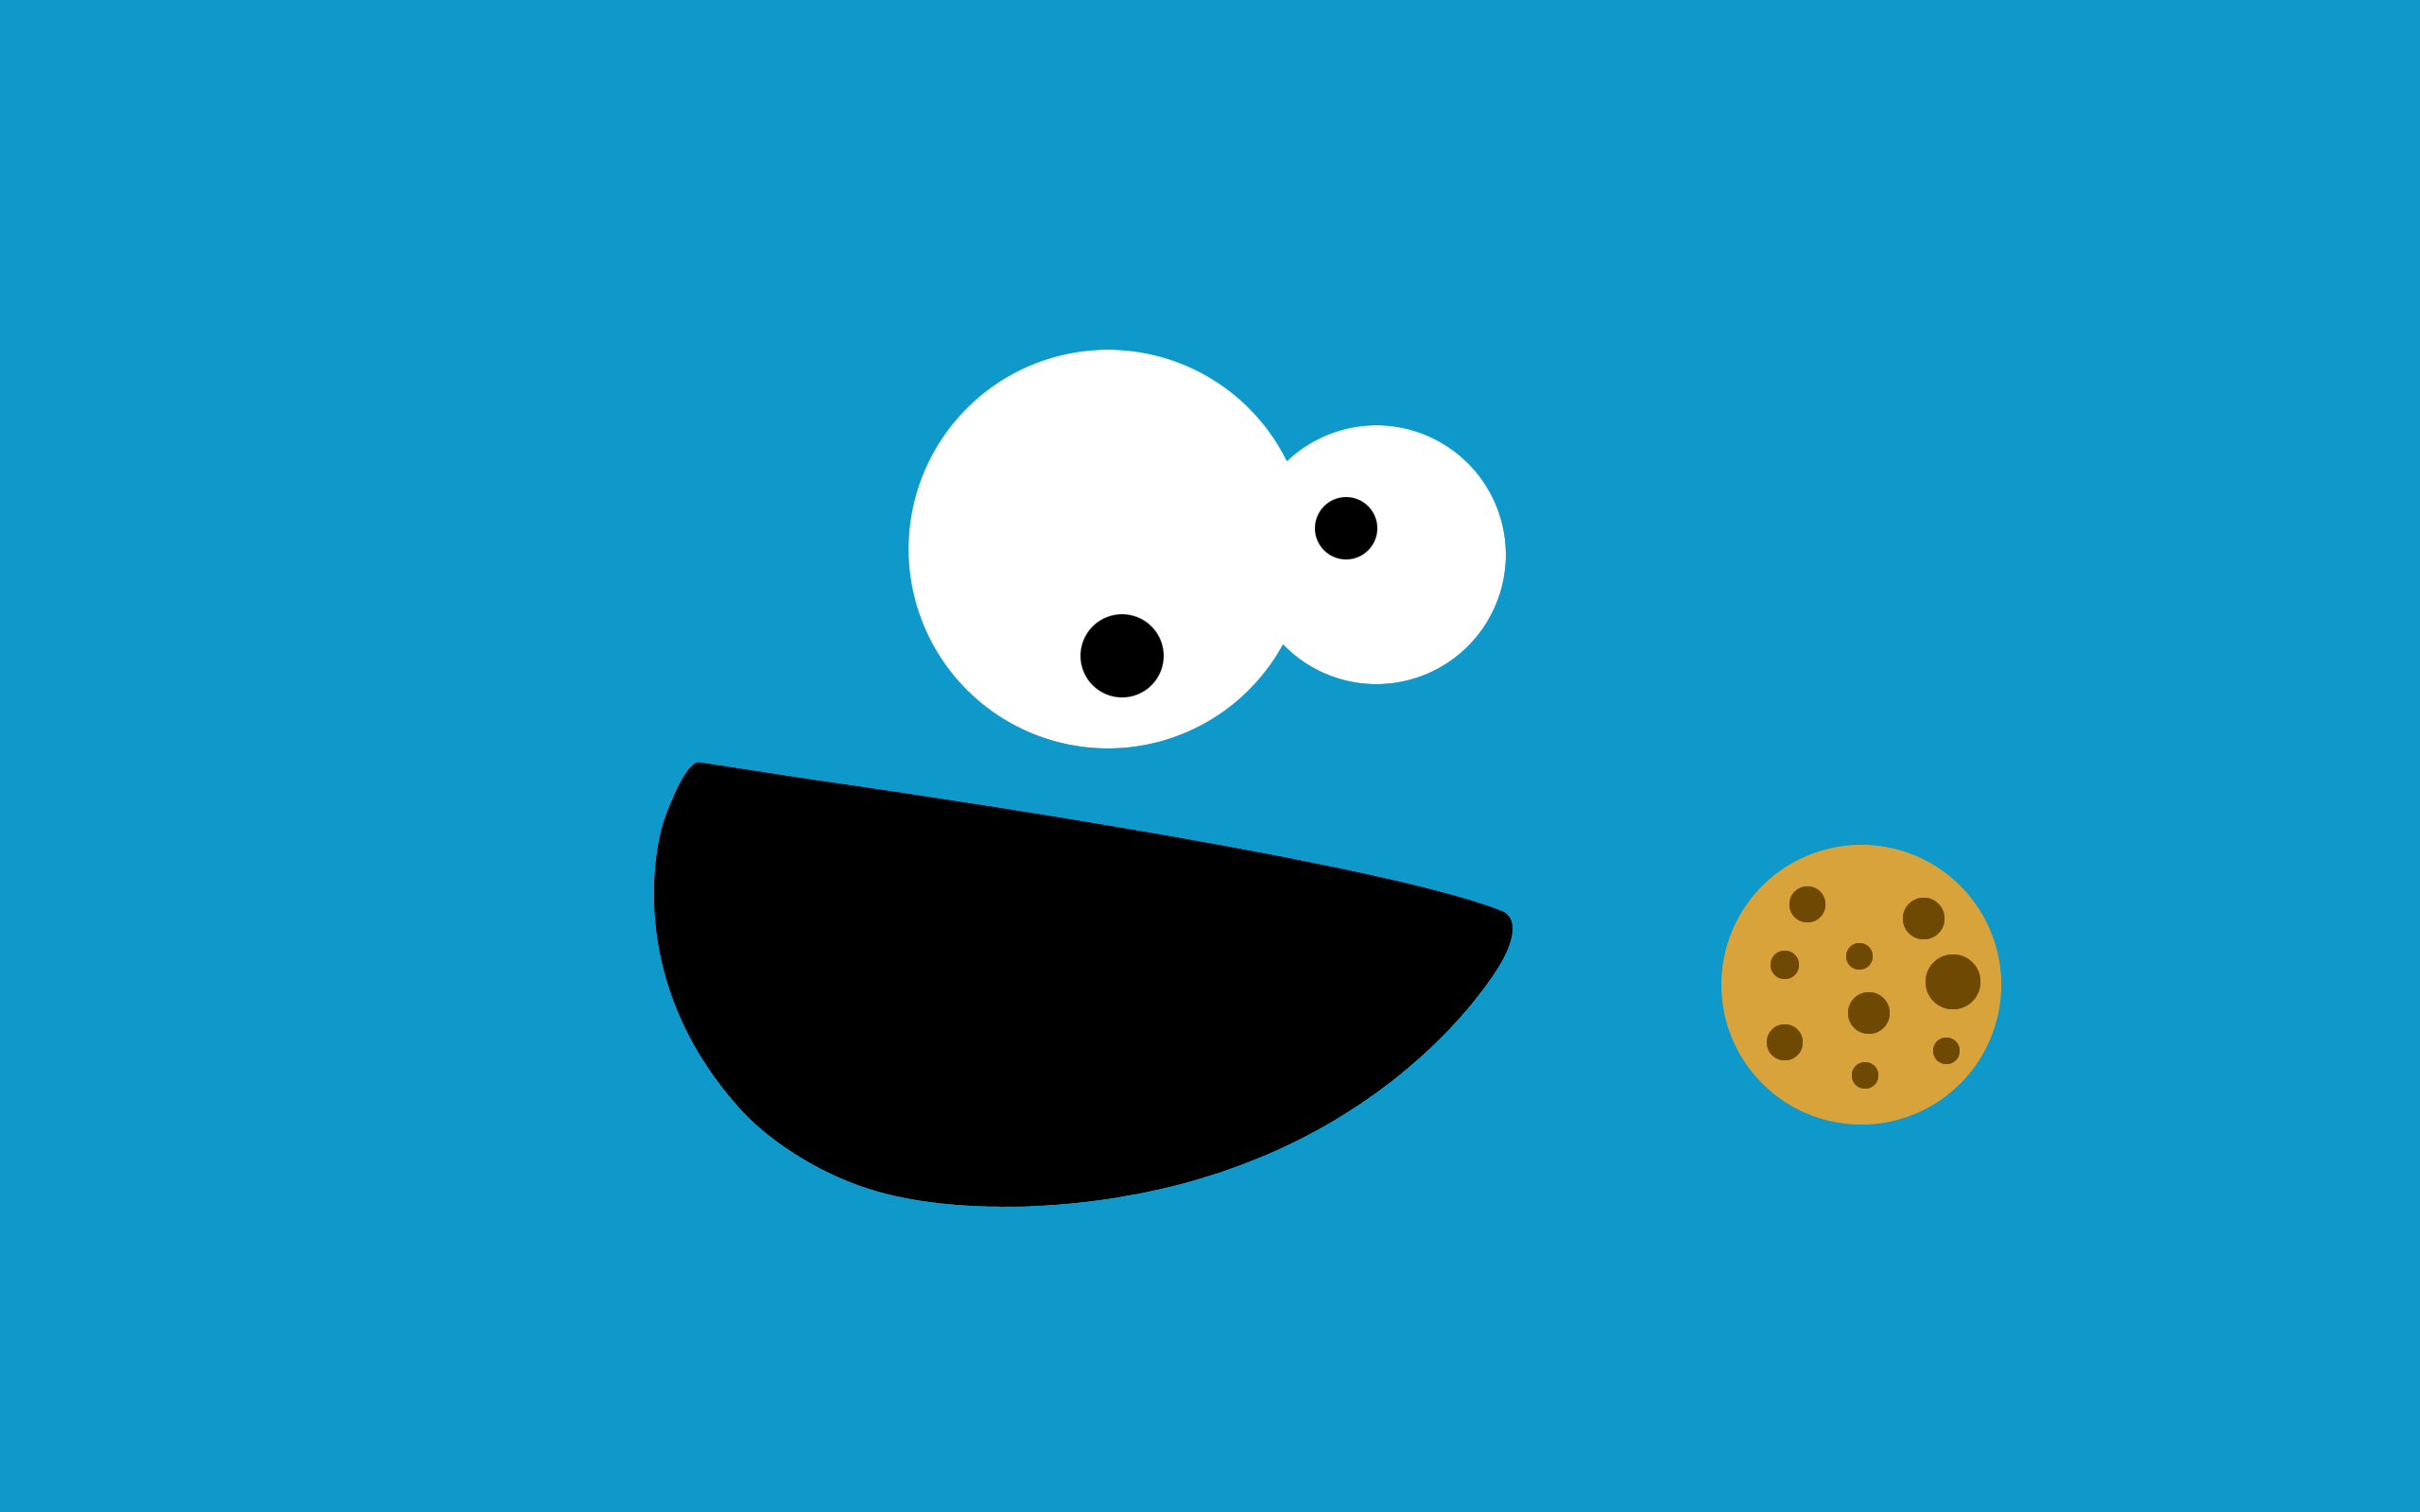 Cookie Monster Wallpaper HD (Picture)